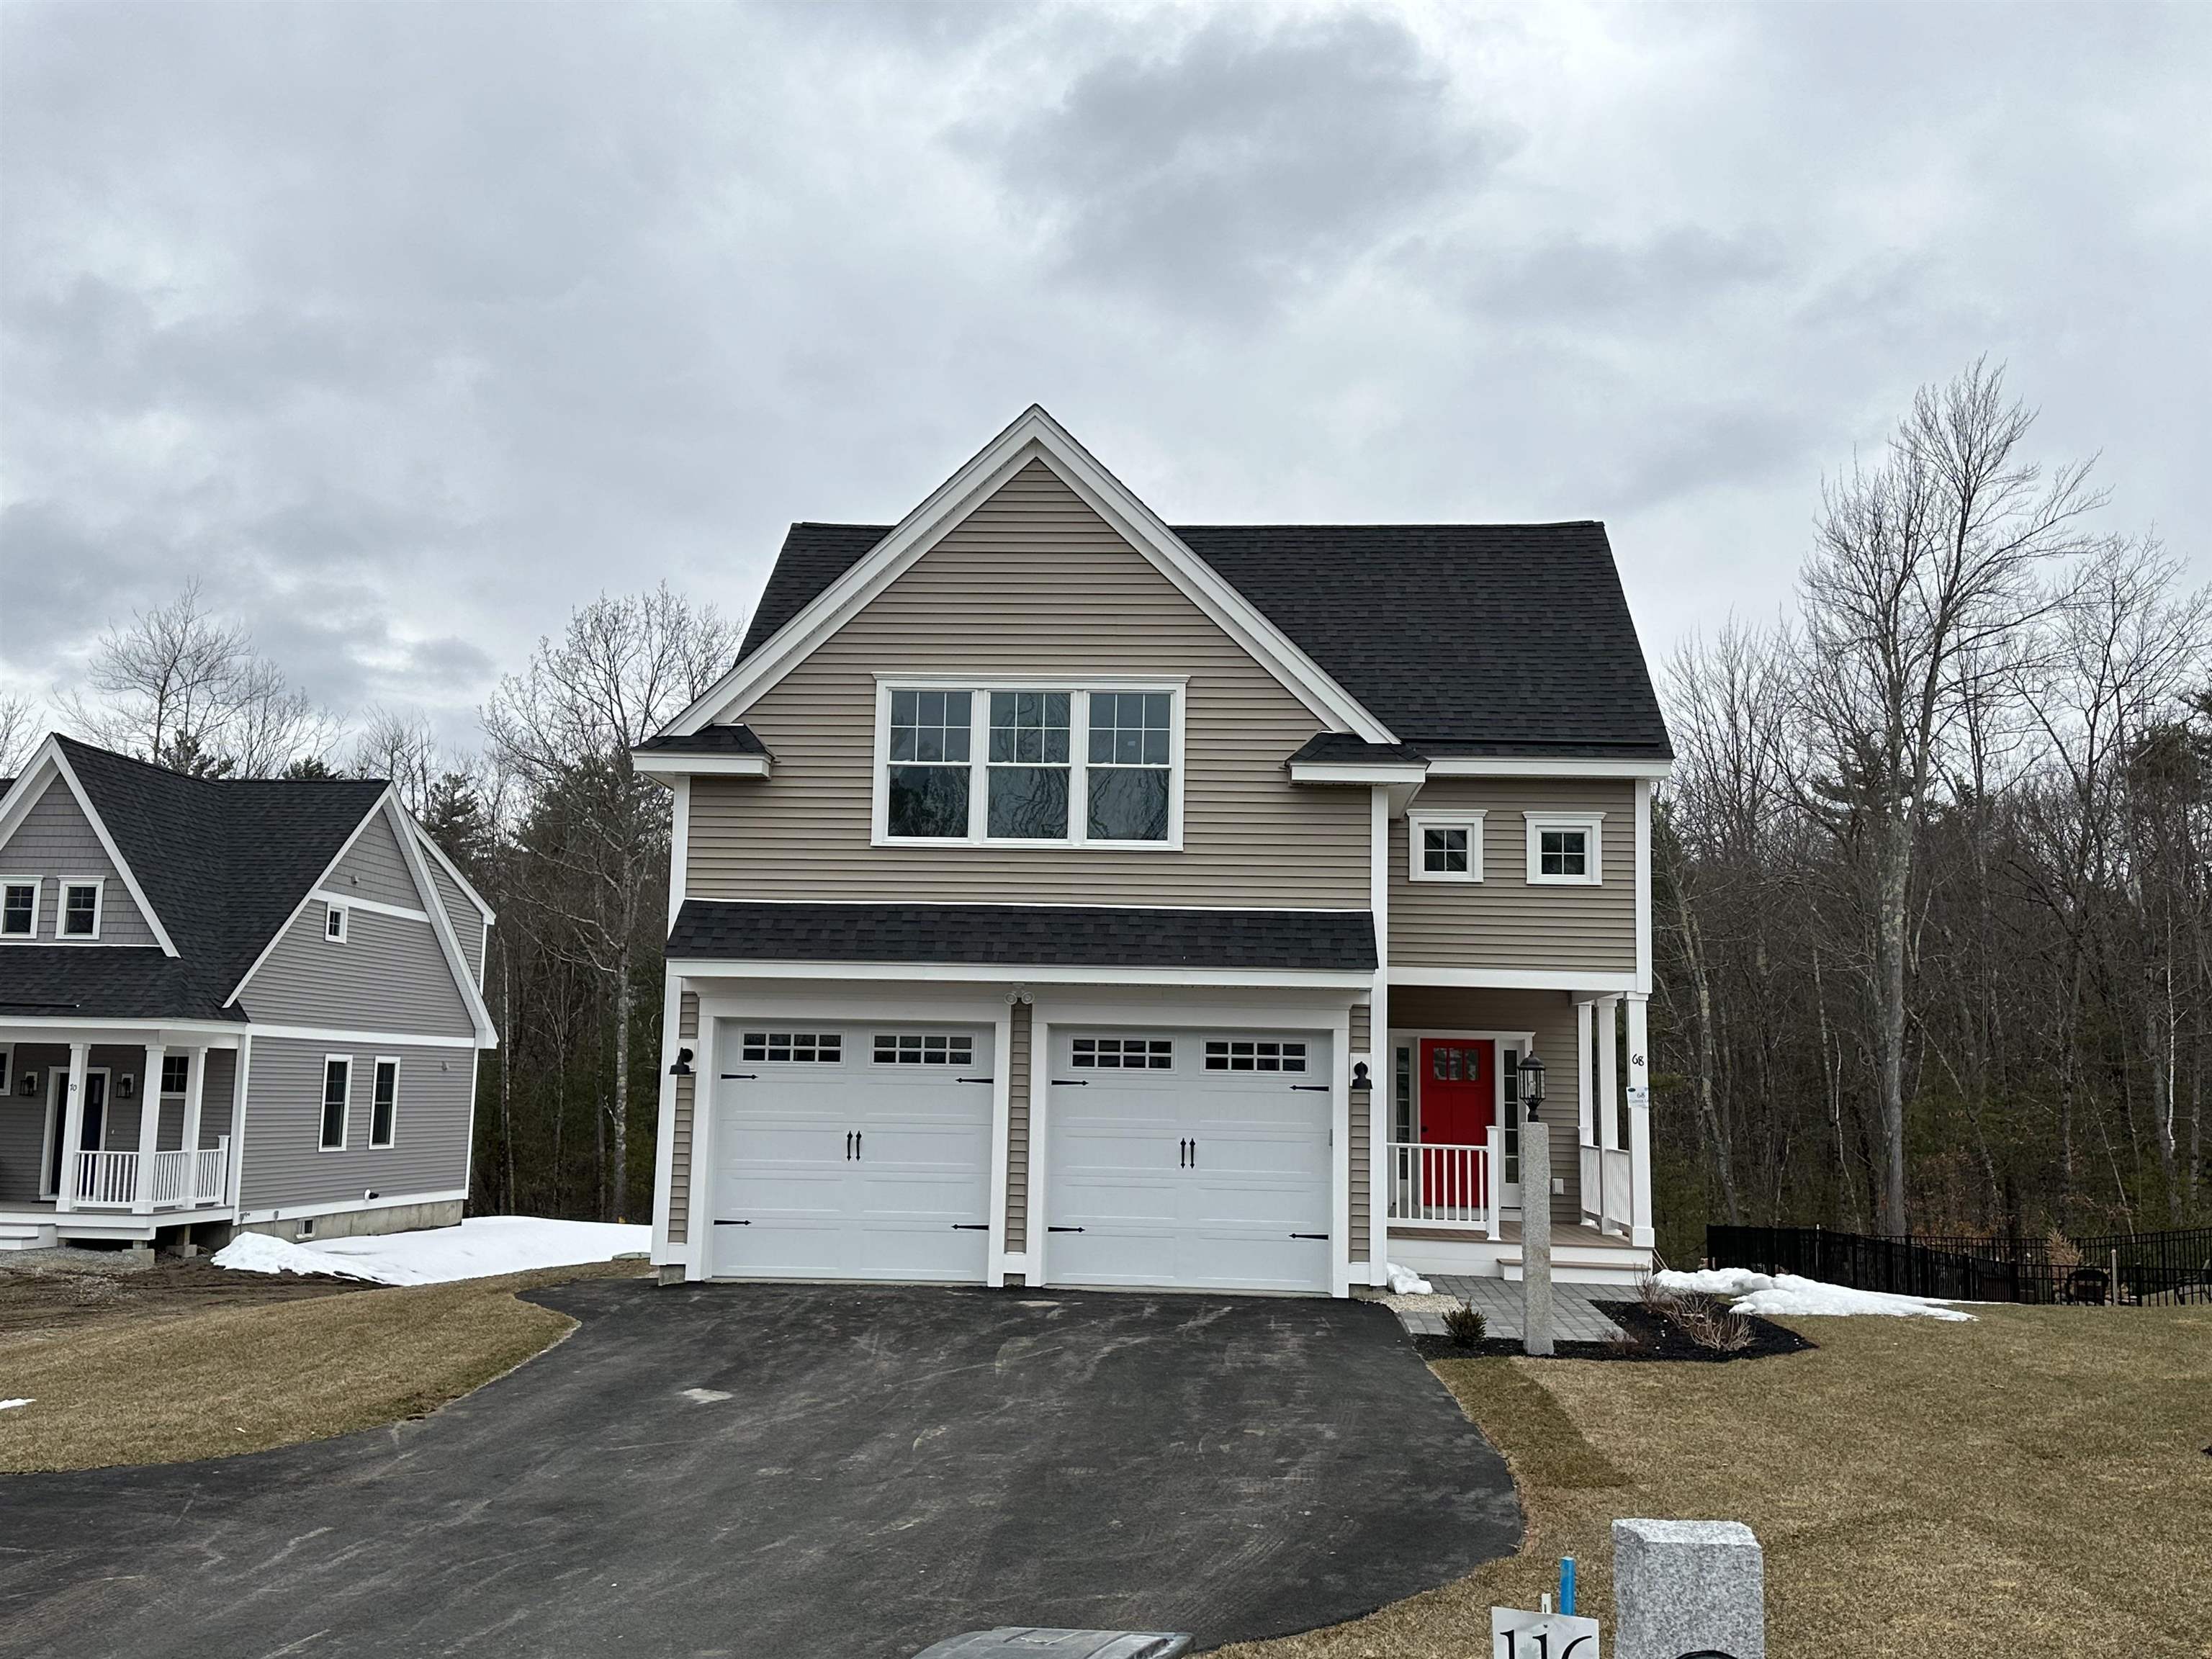 Lot 116 Lorden Commons Lot 116, Londonderry, NH 03053